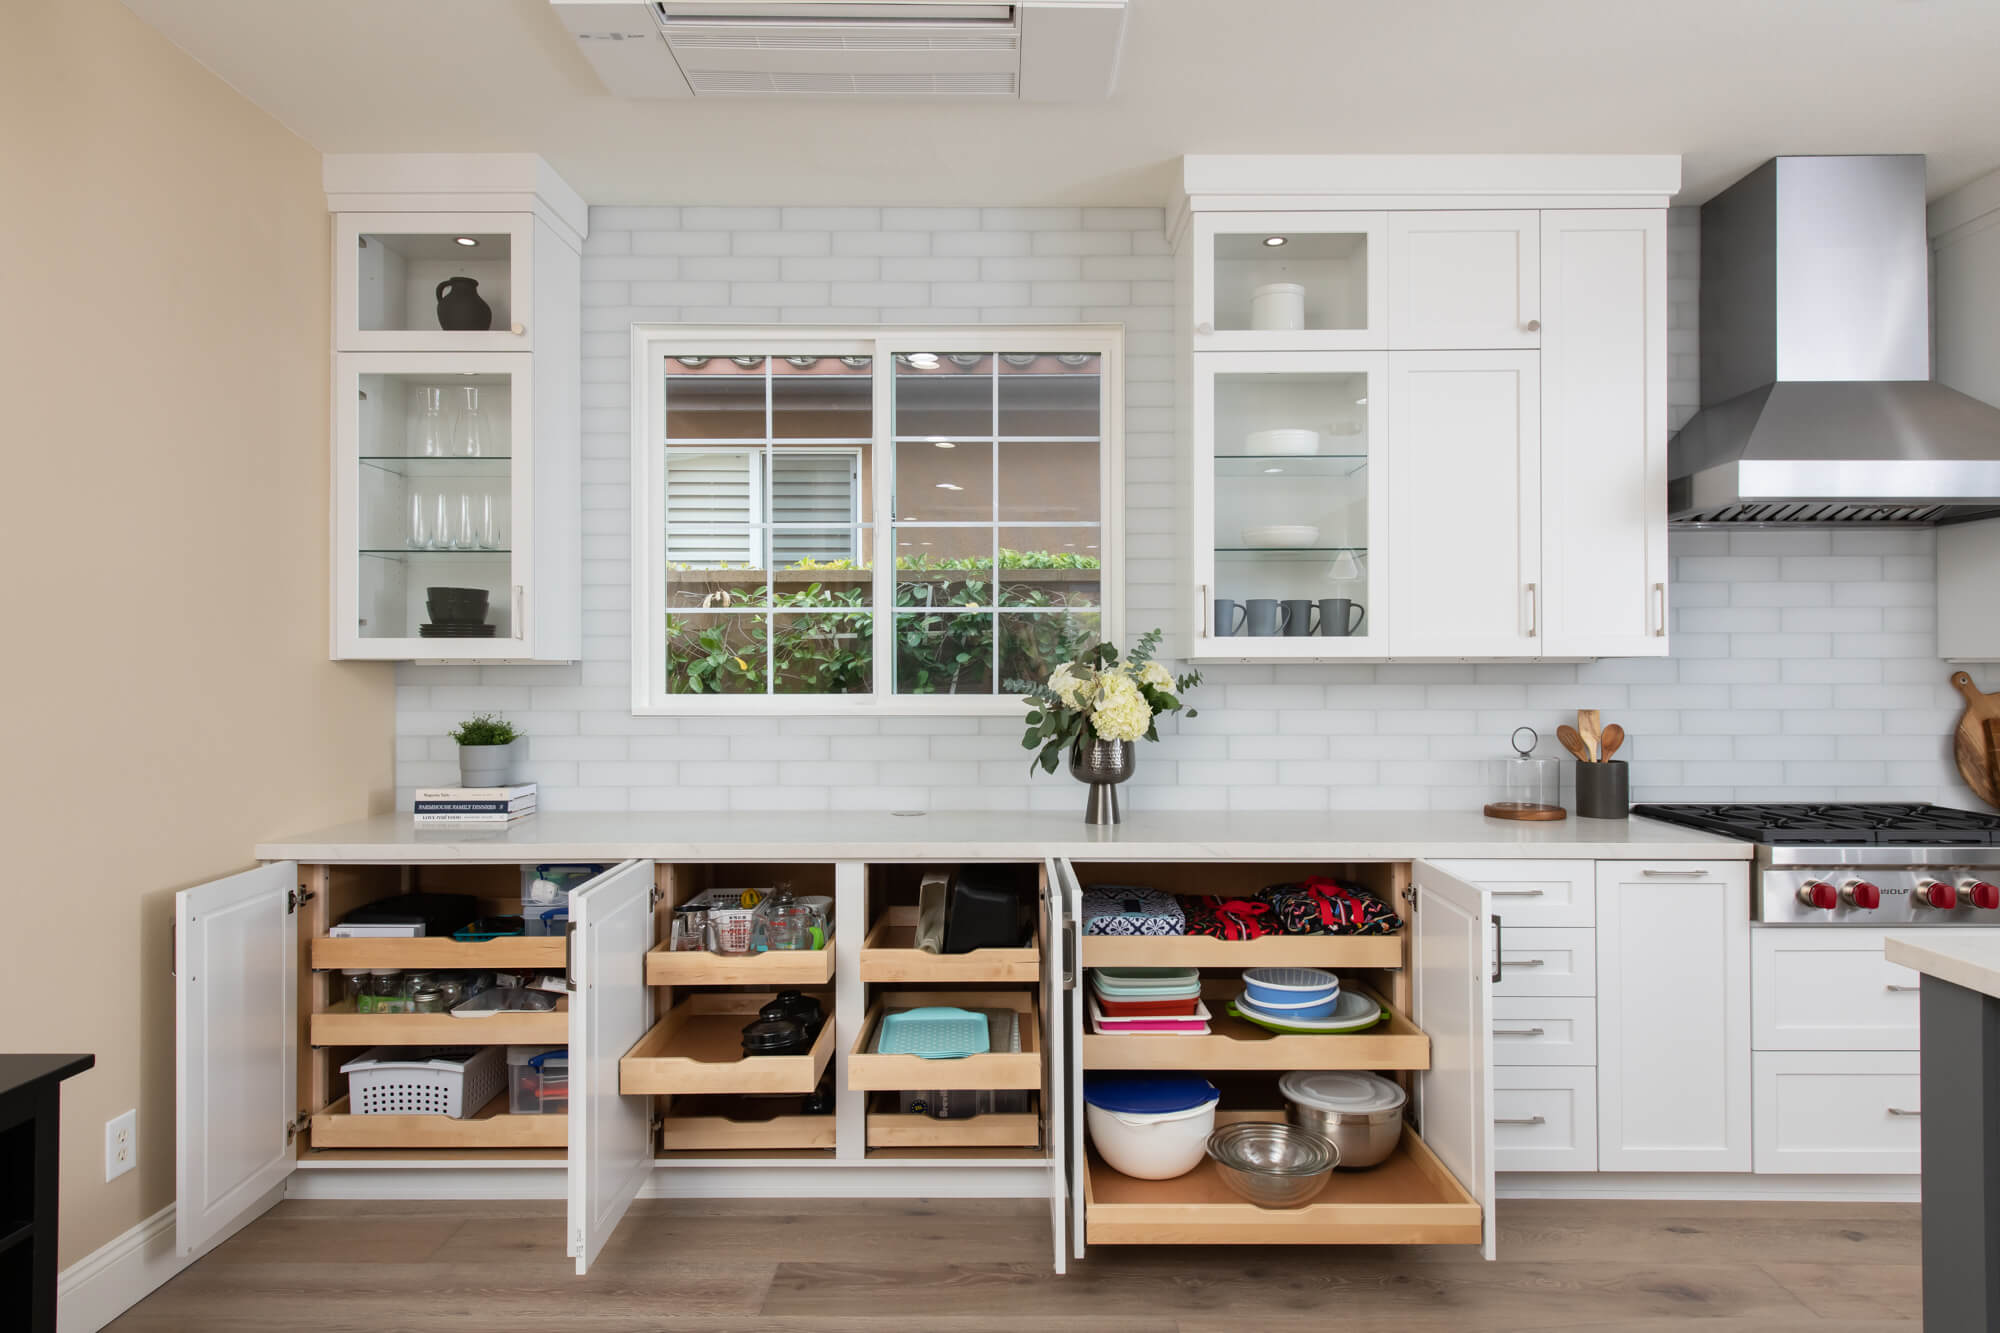 Pros Share 6 Must-Have Kitchen Design Features